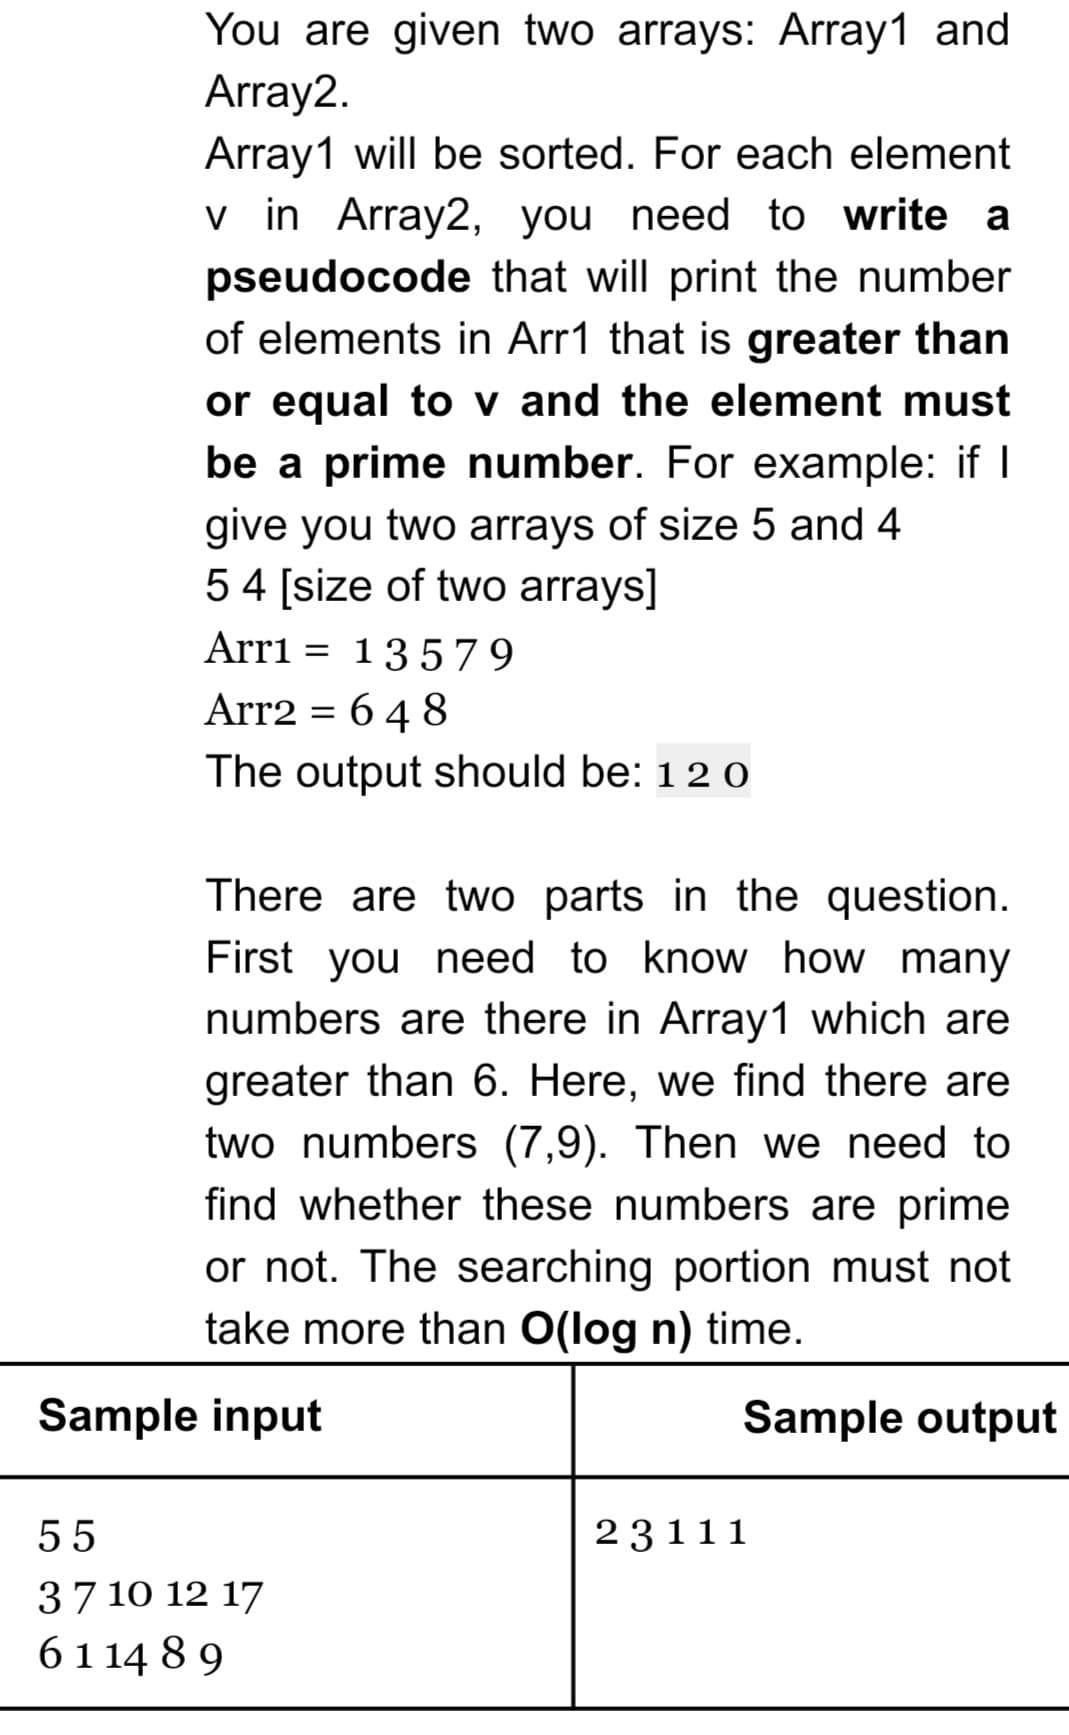 You are given two arrays: Array1 and
Array2.
Array1 will be sorted. For each element
v in Array2, you need to write a
pseudocode that will print the number
of elements in Arr1 that is greater than
or equal to v and the element must
be a prime number. For example: if I
give you two arrays of size 5 and 4
5 4 [size of two arrays]
Arri = 13579
Arr2 = 6 4 8
The output should be: 12 o
There are two parts in the question.
First you need to know how many
numbers are there in Array1 which are
greater than 6. Here, we find there are
two numbers (7,9). Then we need to
find whether these numbers are prime
or not. The searching portion must not
take more than O(log n) time.
Sample input
Sample output
55
23111
37 10 12 17
61 14 8 9
